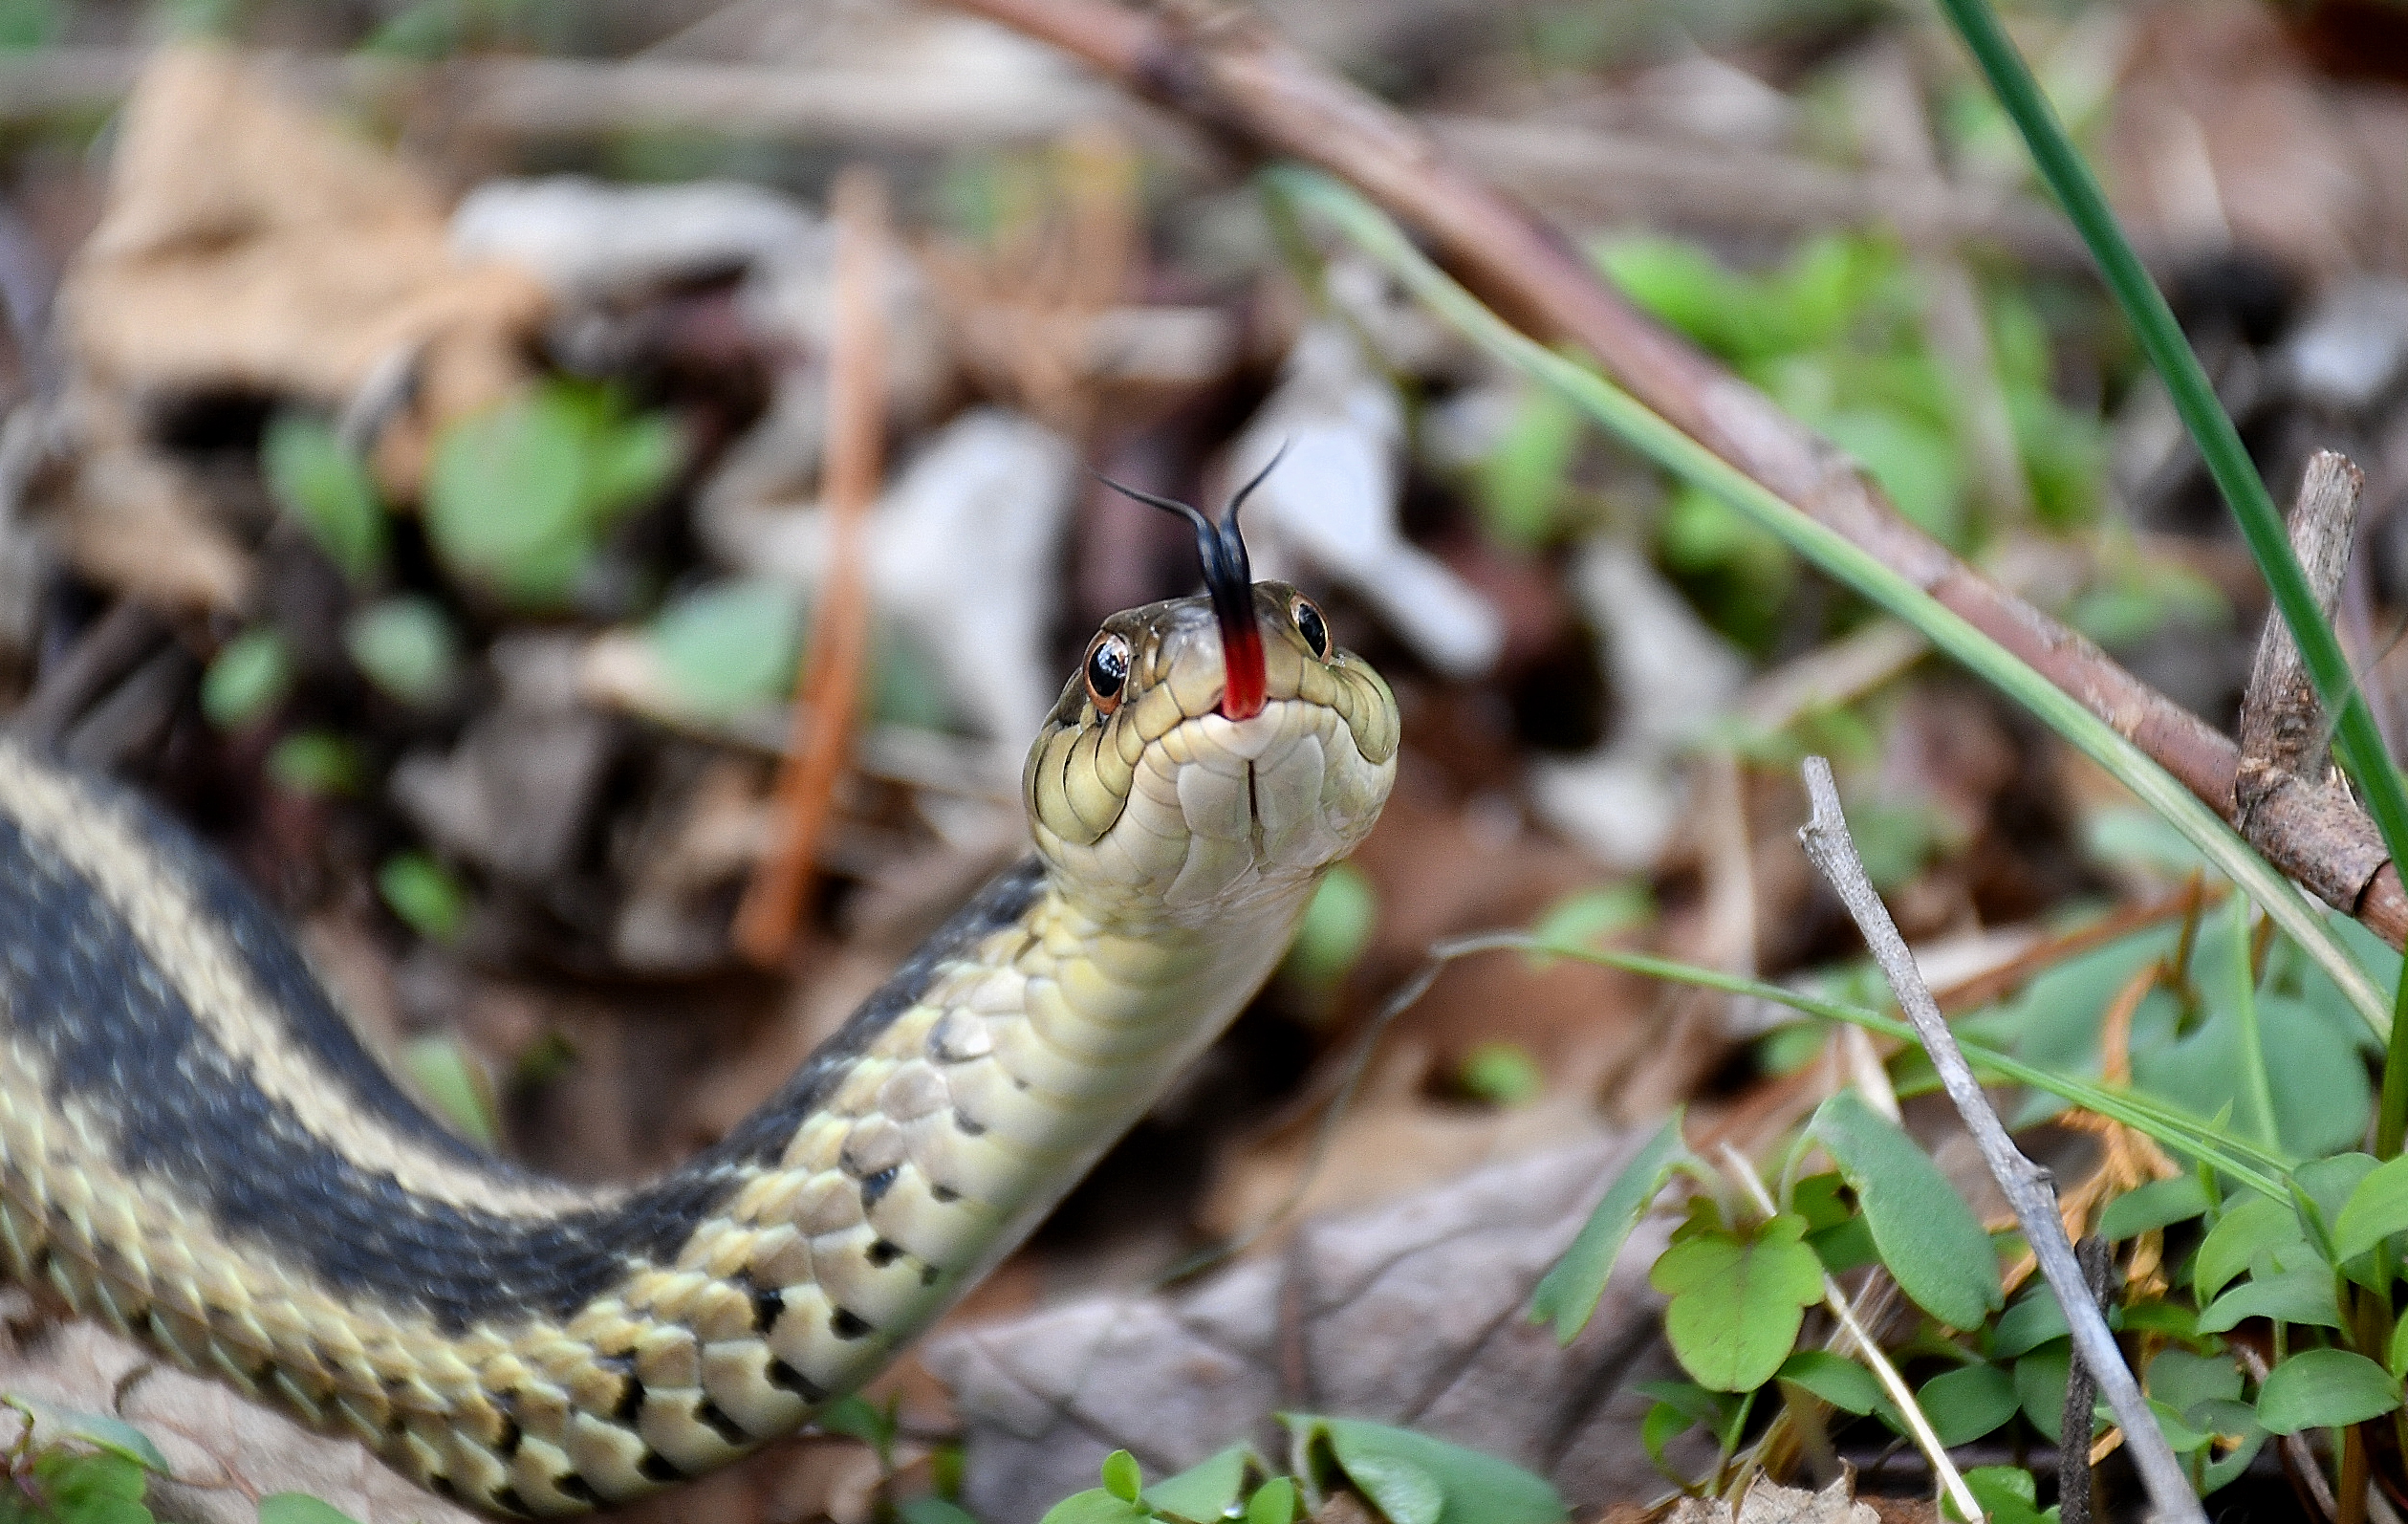 A common garter snake sniffing the air with its forked tongue.